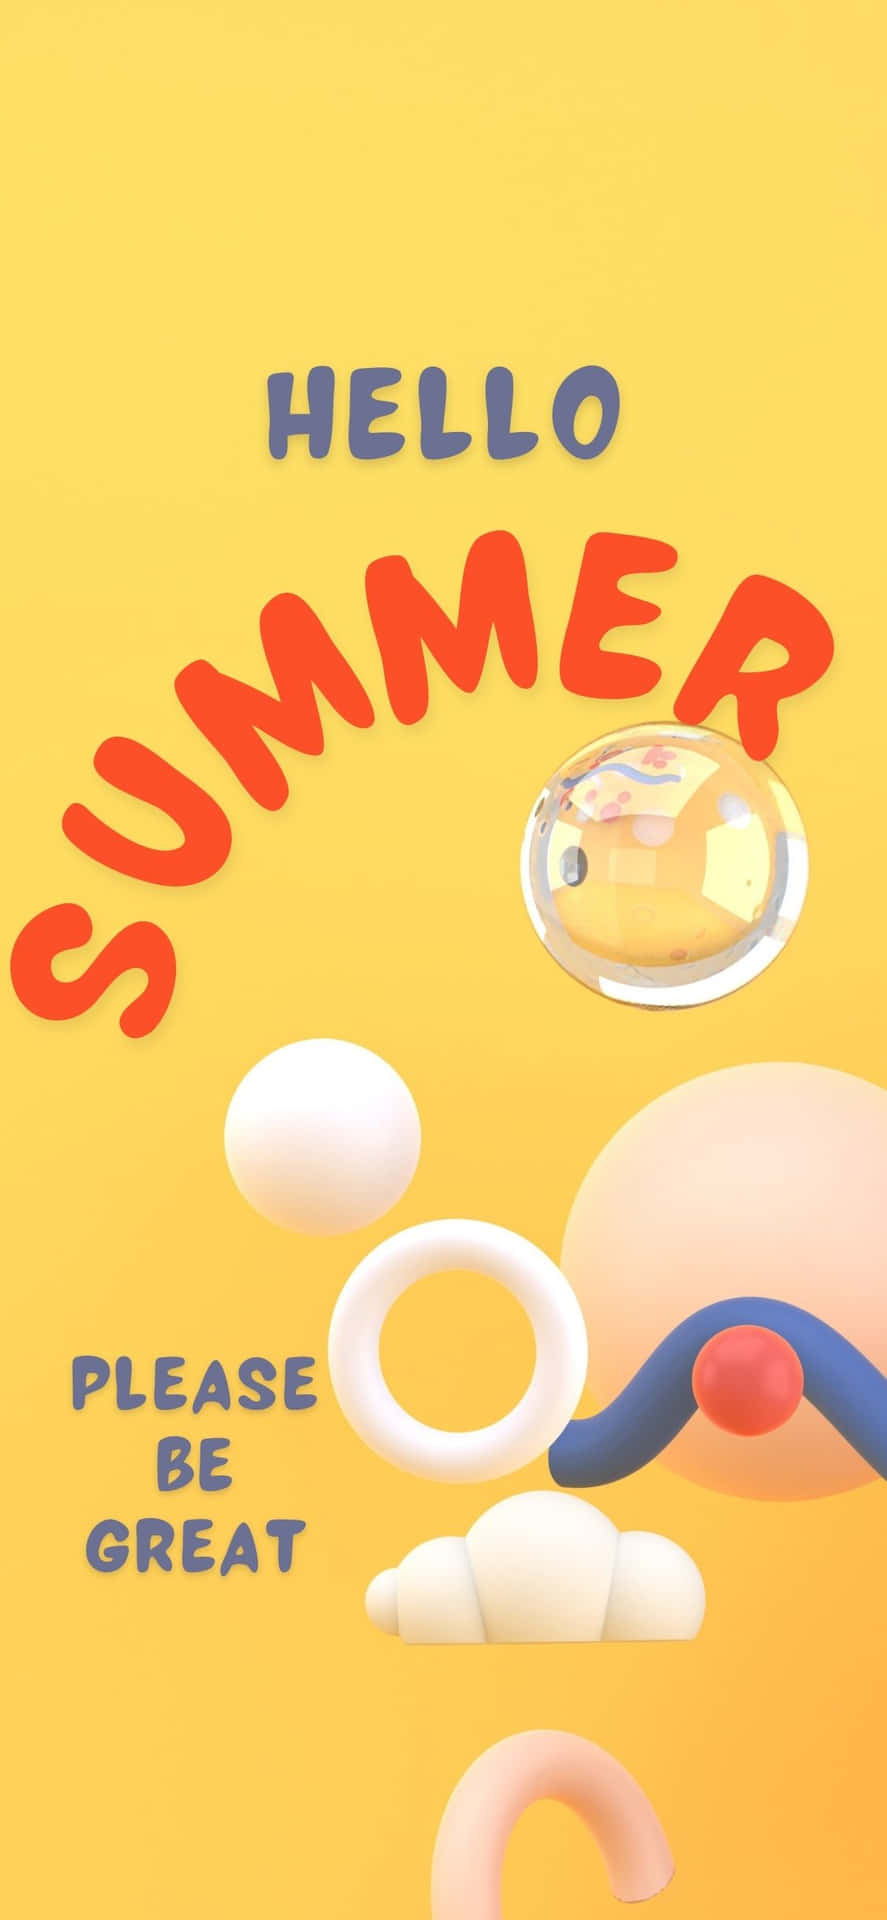 Abstract Shapes iPhone X Summer Background